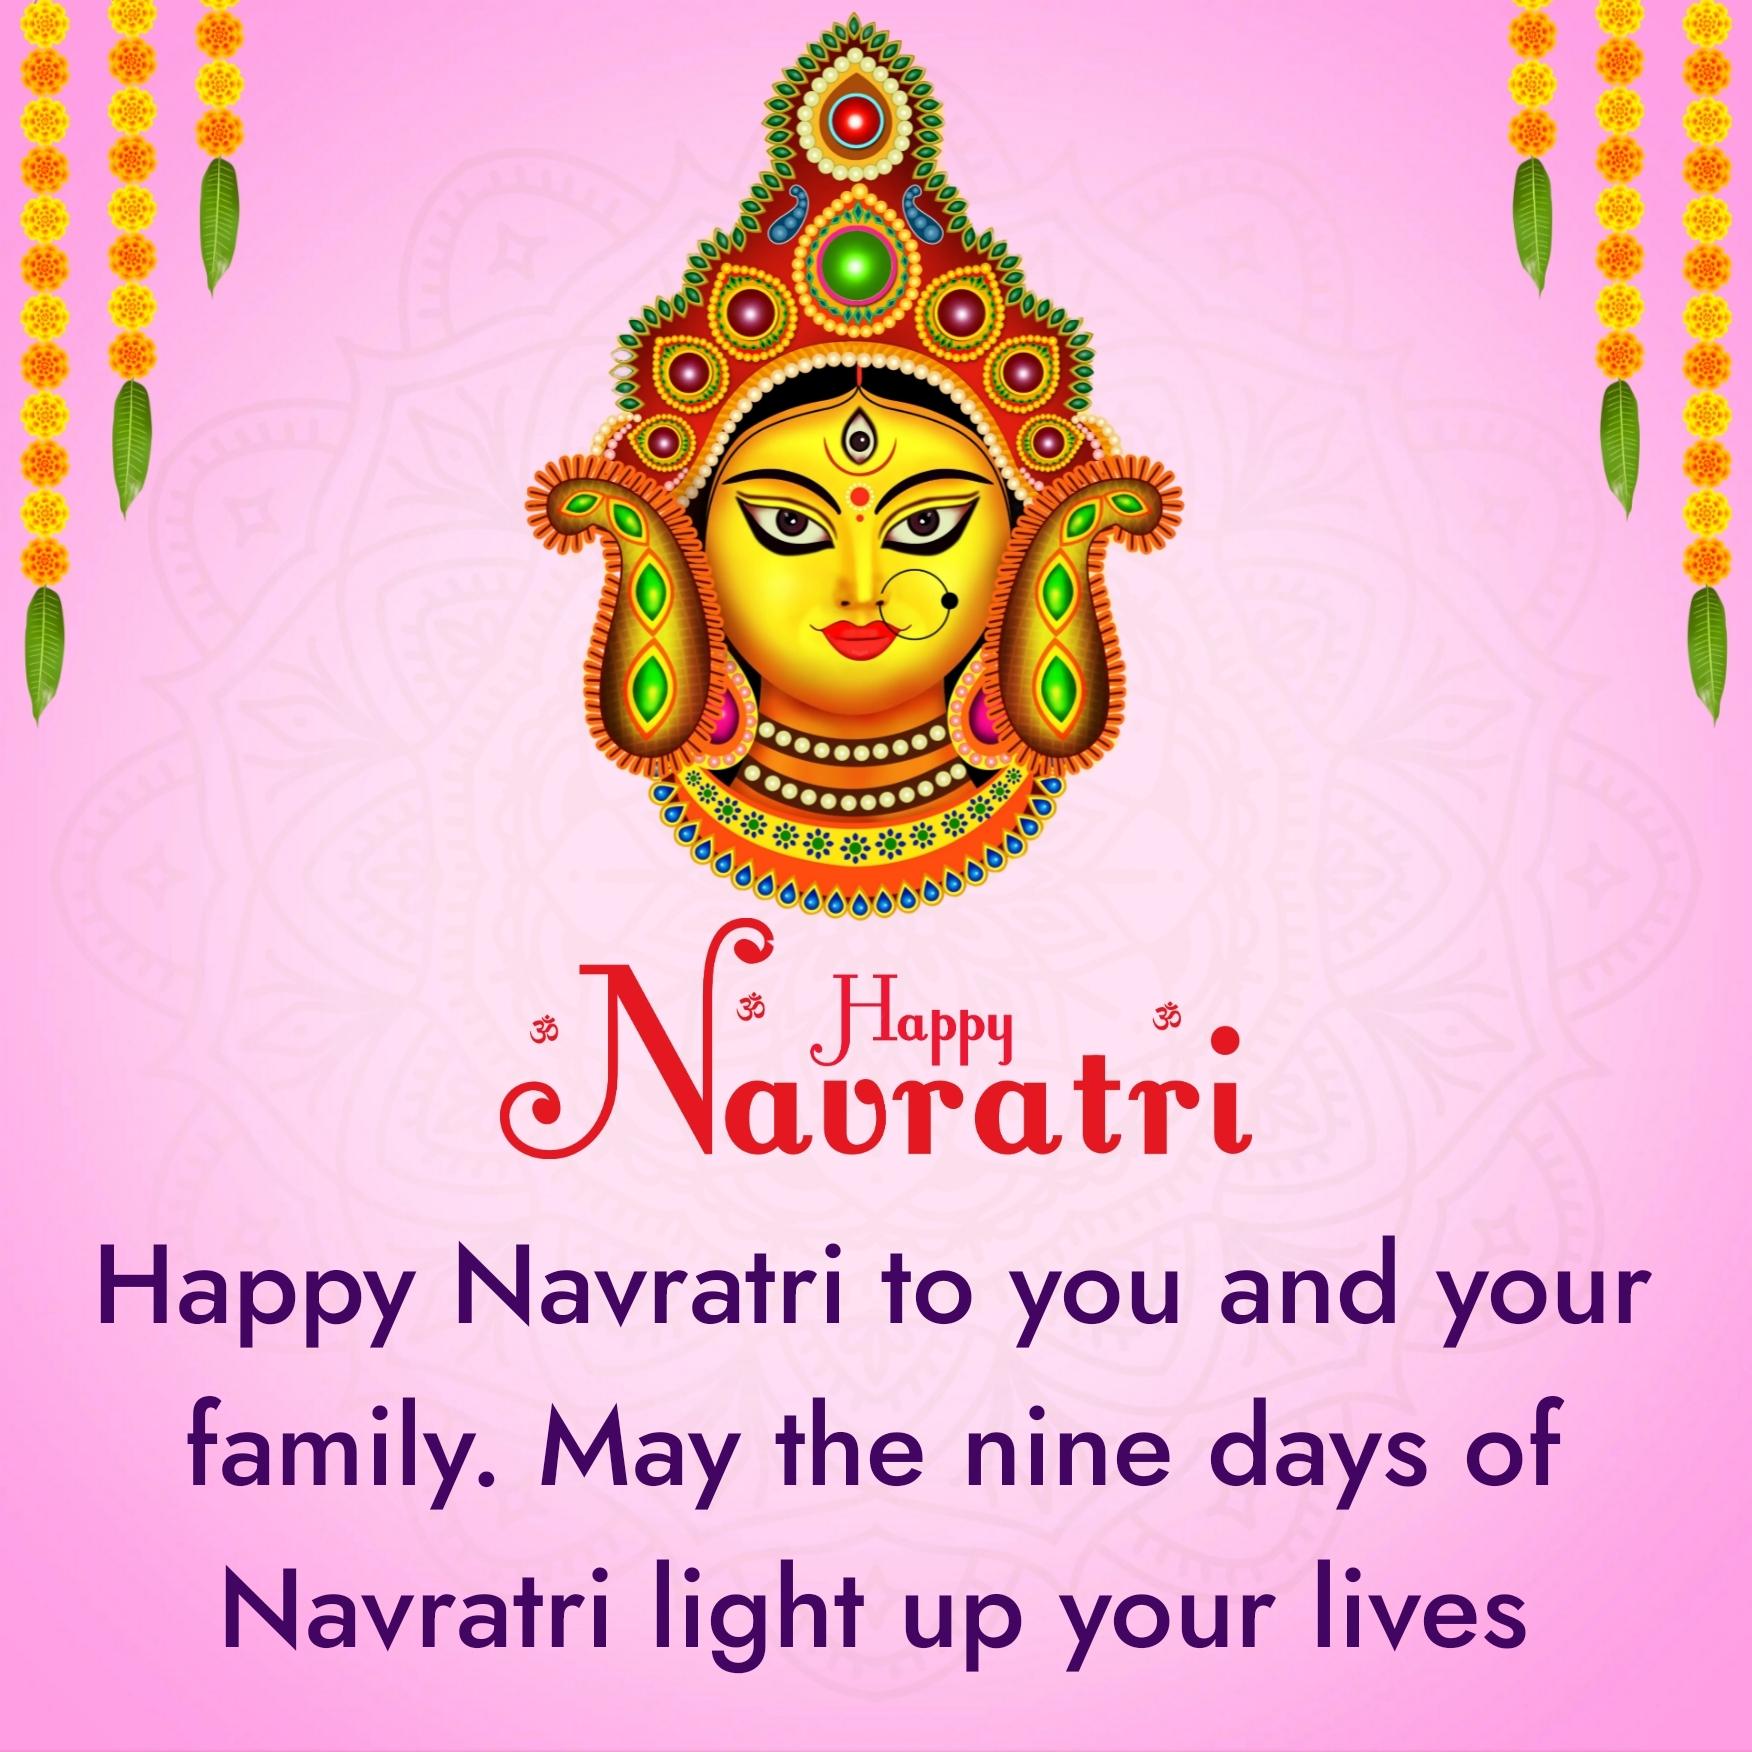 Happy Navratri to you and your family